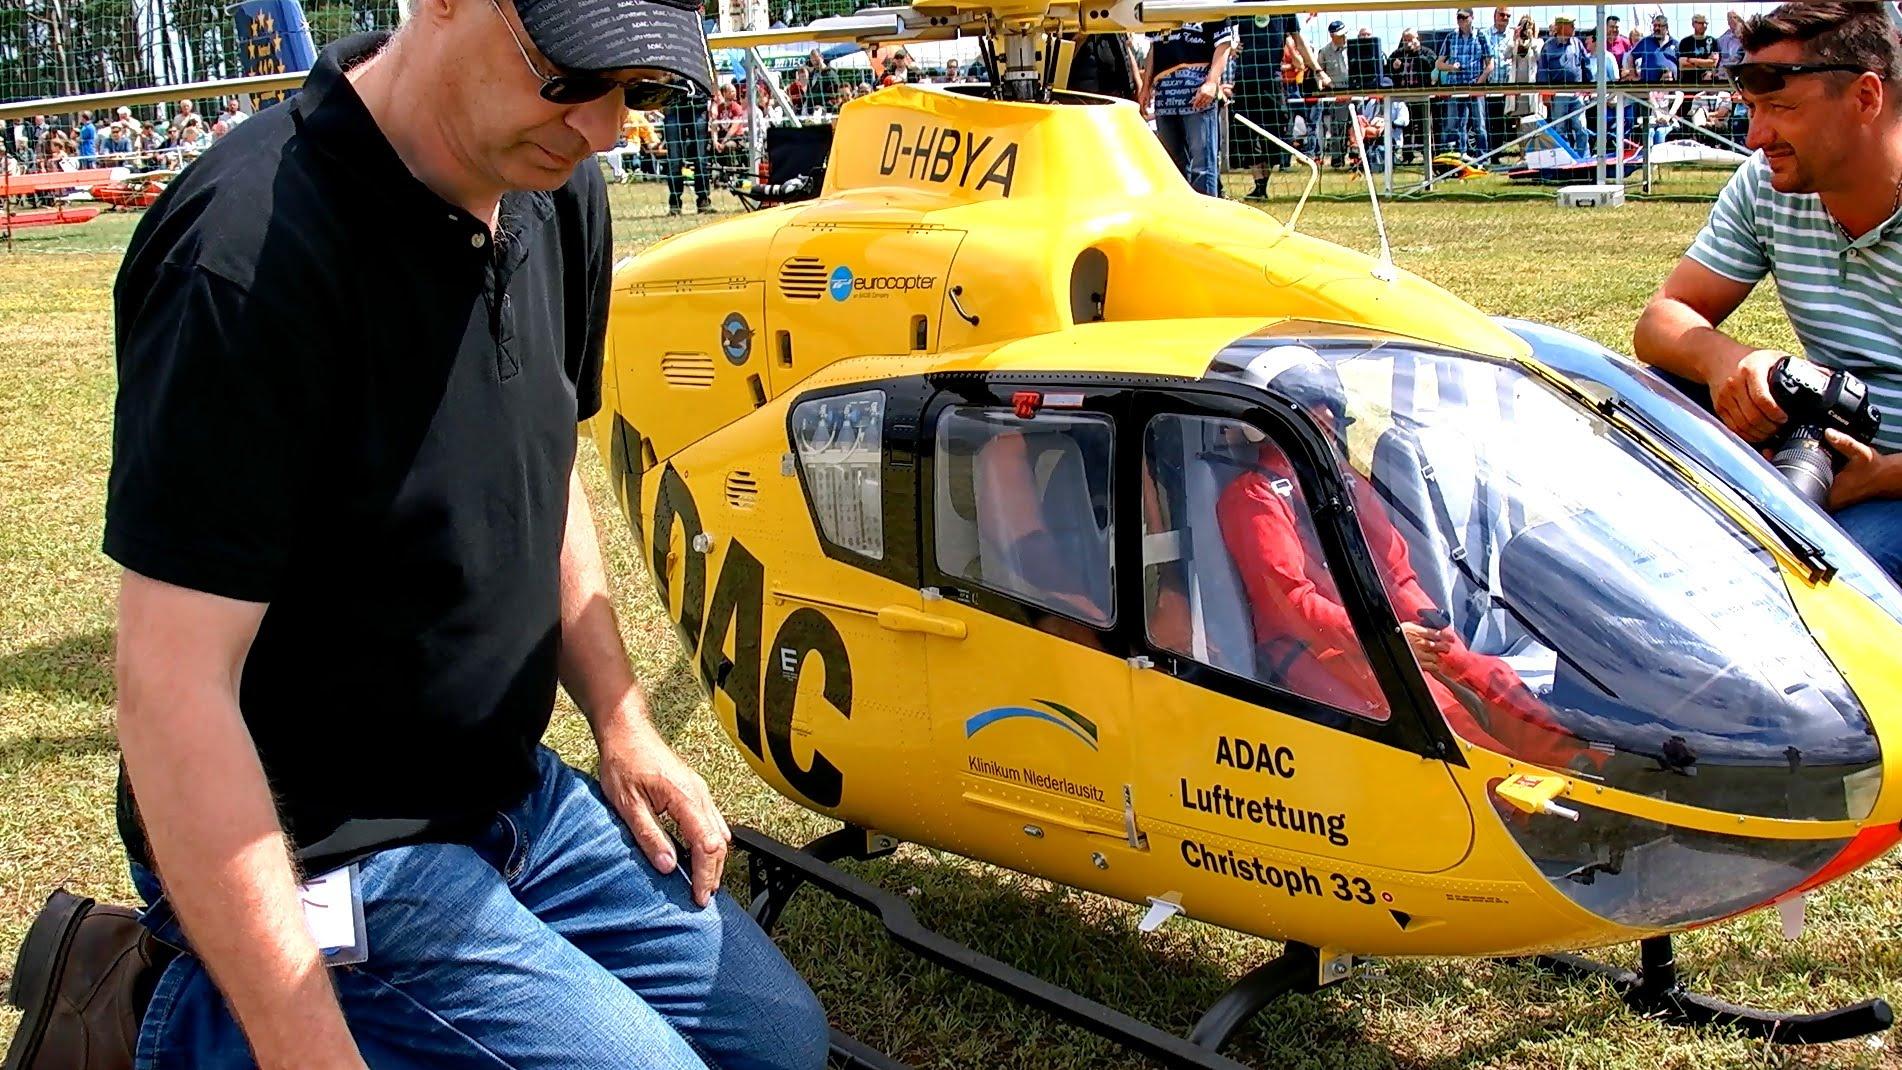 World'S Biggest Rc Helicopter: Mastering the Skill of Building and Operating the World's Biggest RC Helicopter